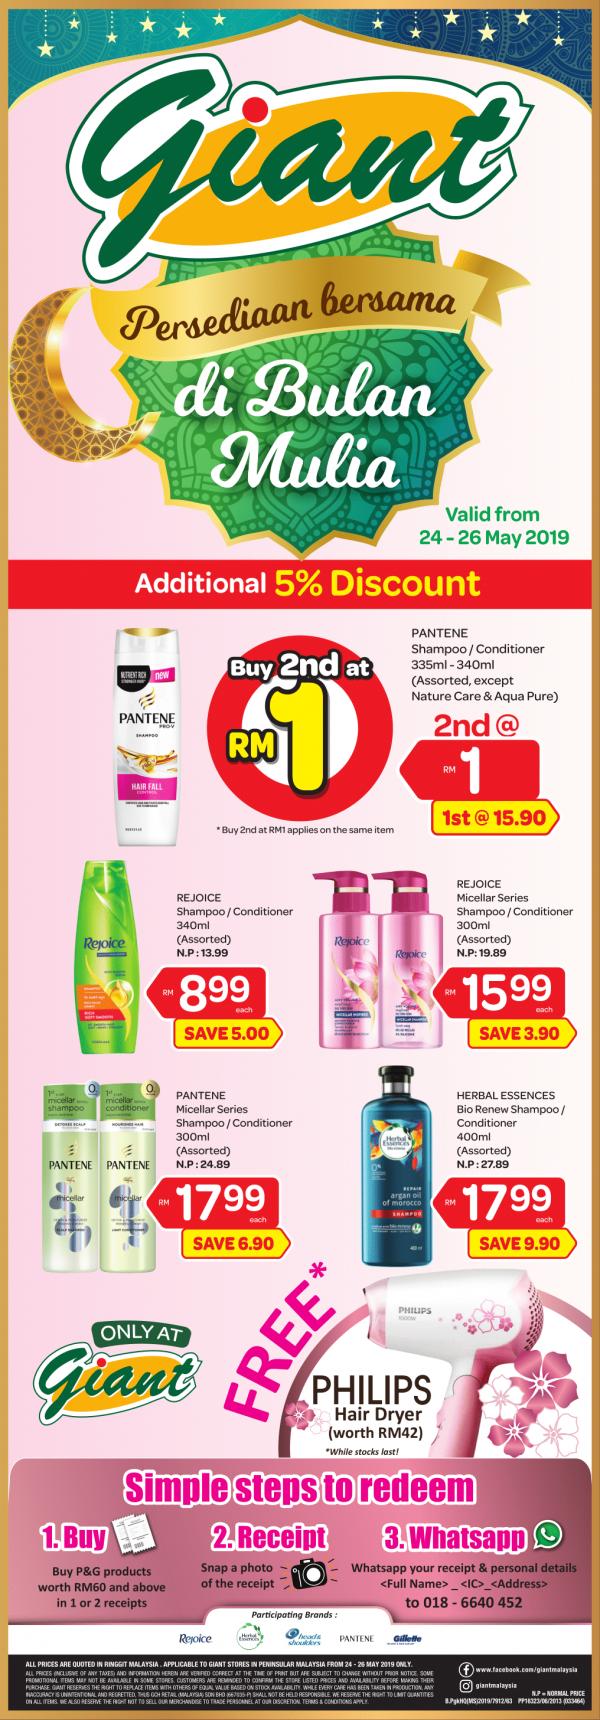 Giant Hair Care Promotion (24 May 2019 - 26 May 2019)